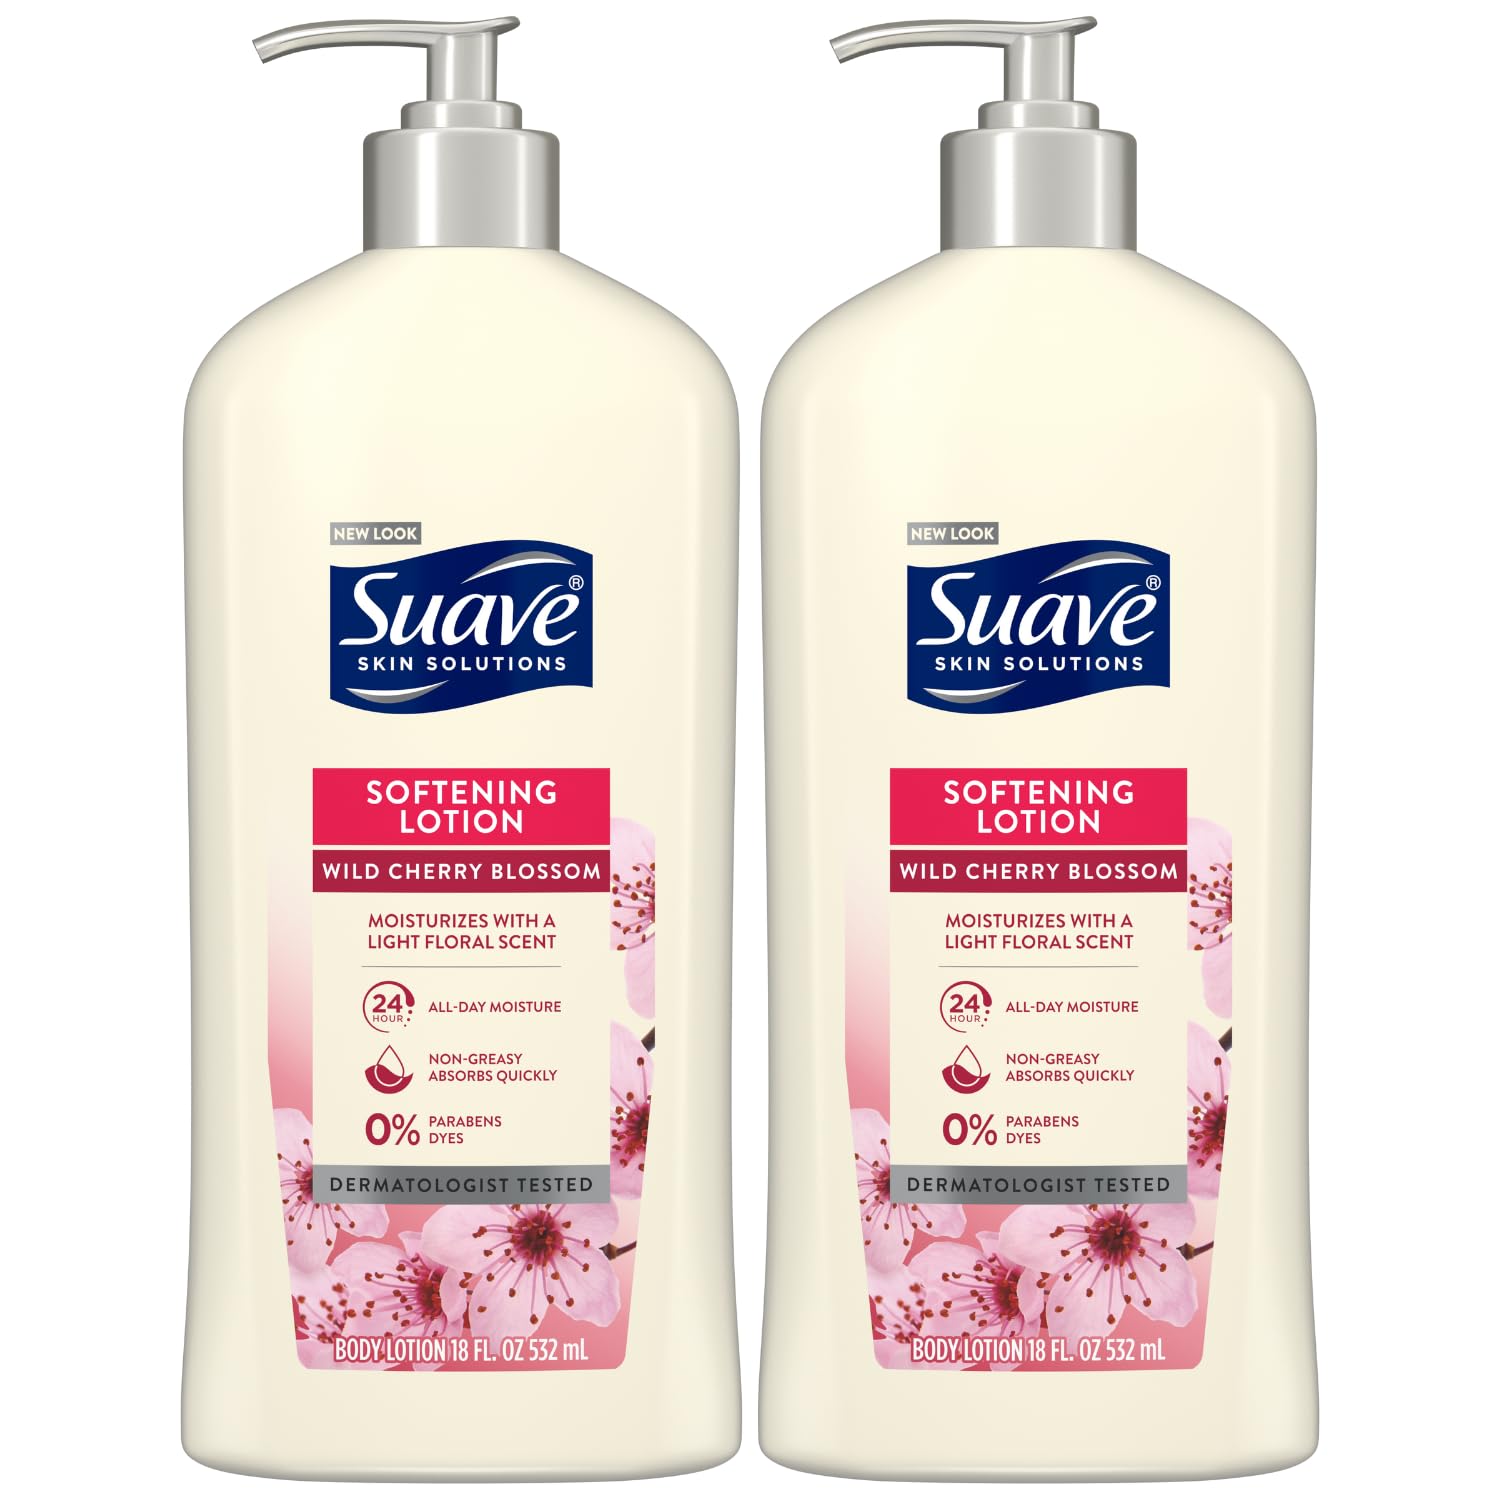 Suave Body Lotion for Women - Wild Cherry Blossom Light Floral Scent, Lotion for Dry Skin, Paraben-Free Moisturizing Body Lotion, 18 Oz Ea (Pack of 2)